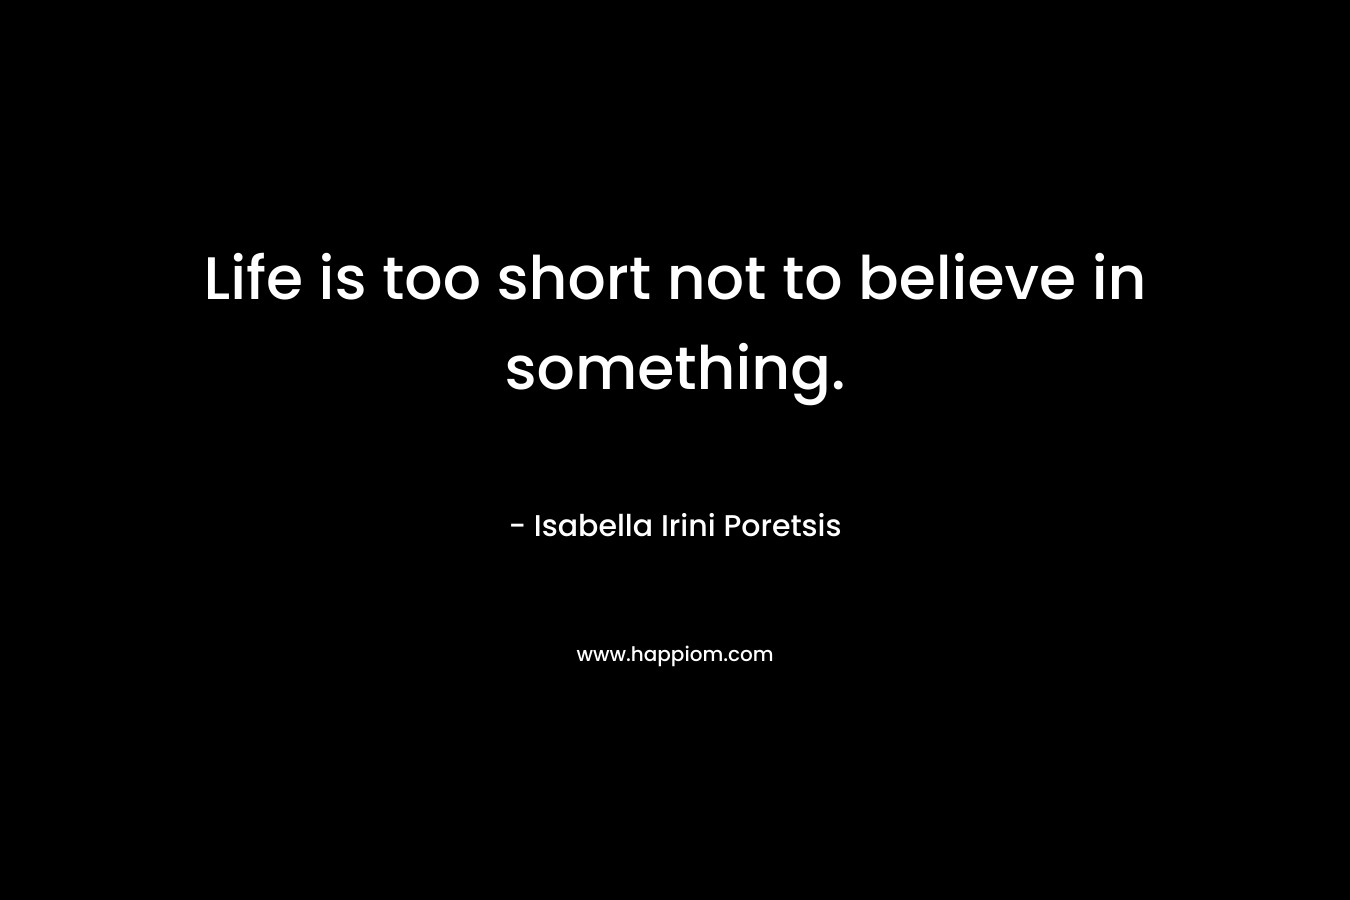 Life is too short not to believe in something.